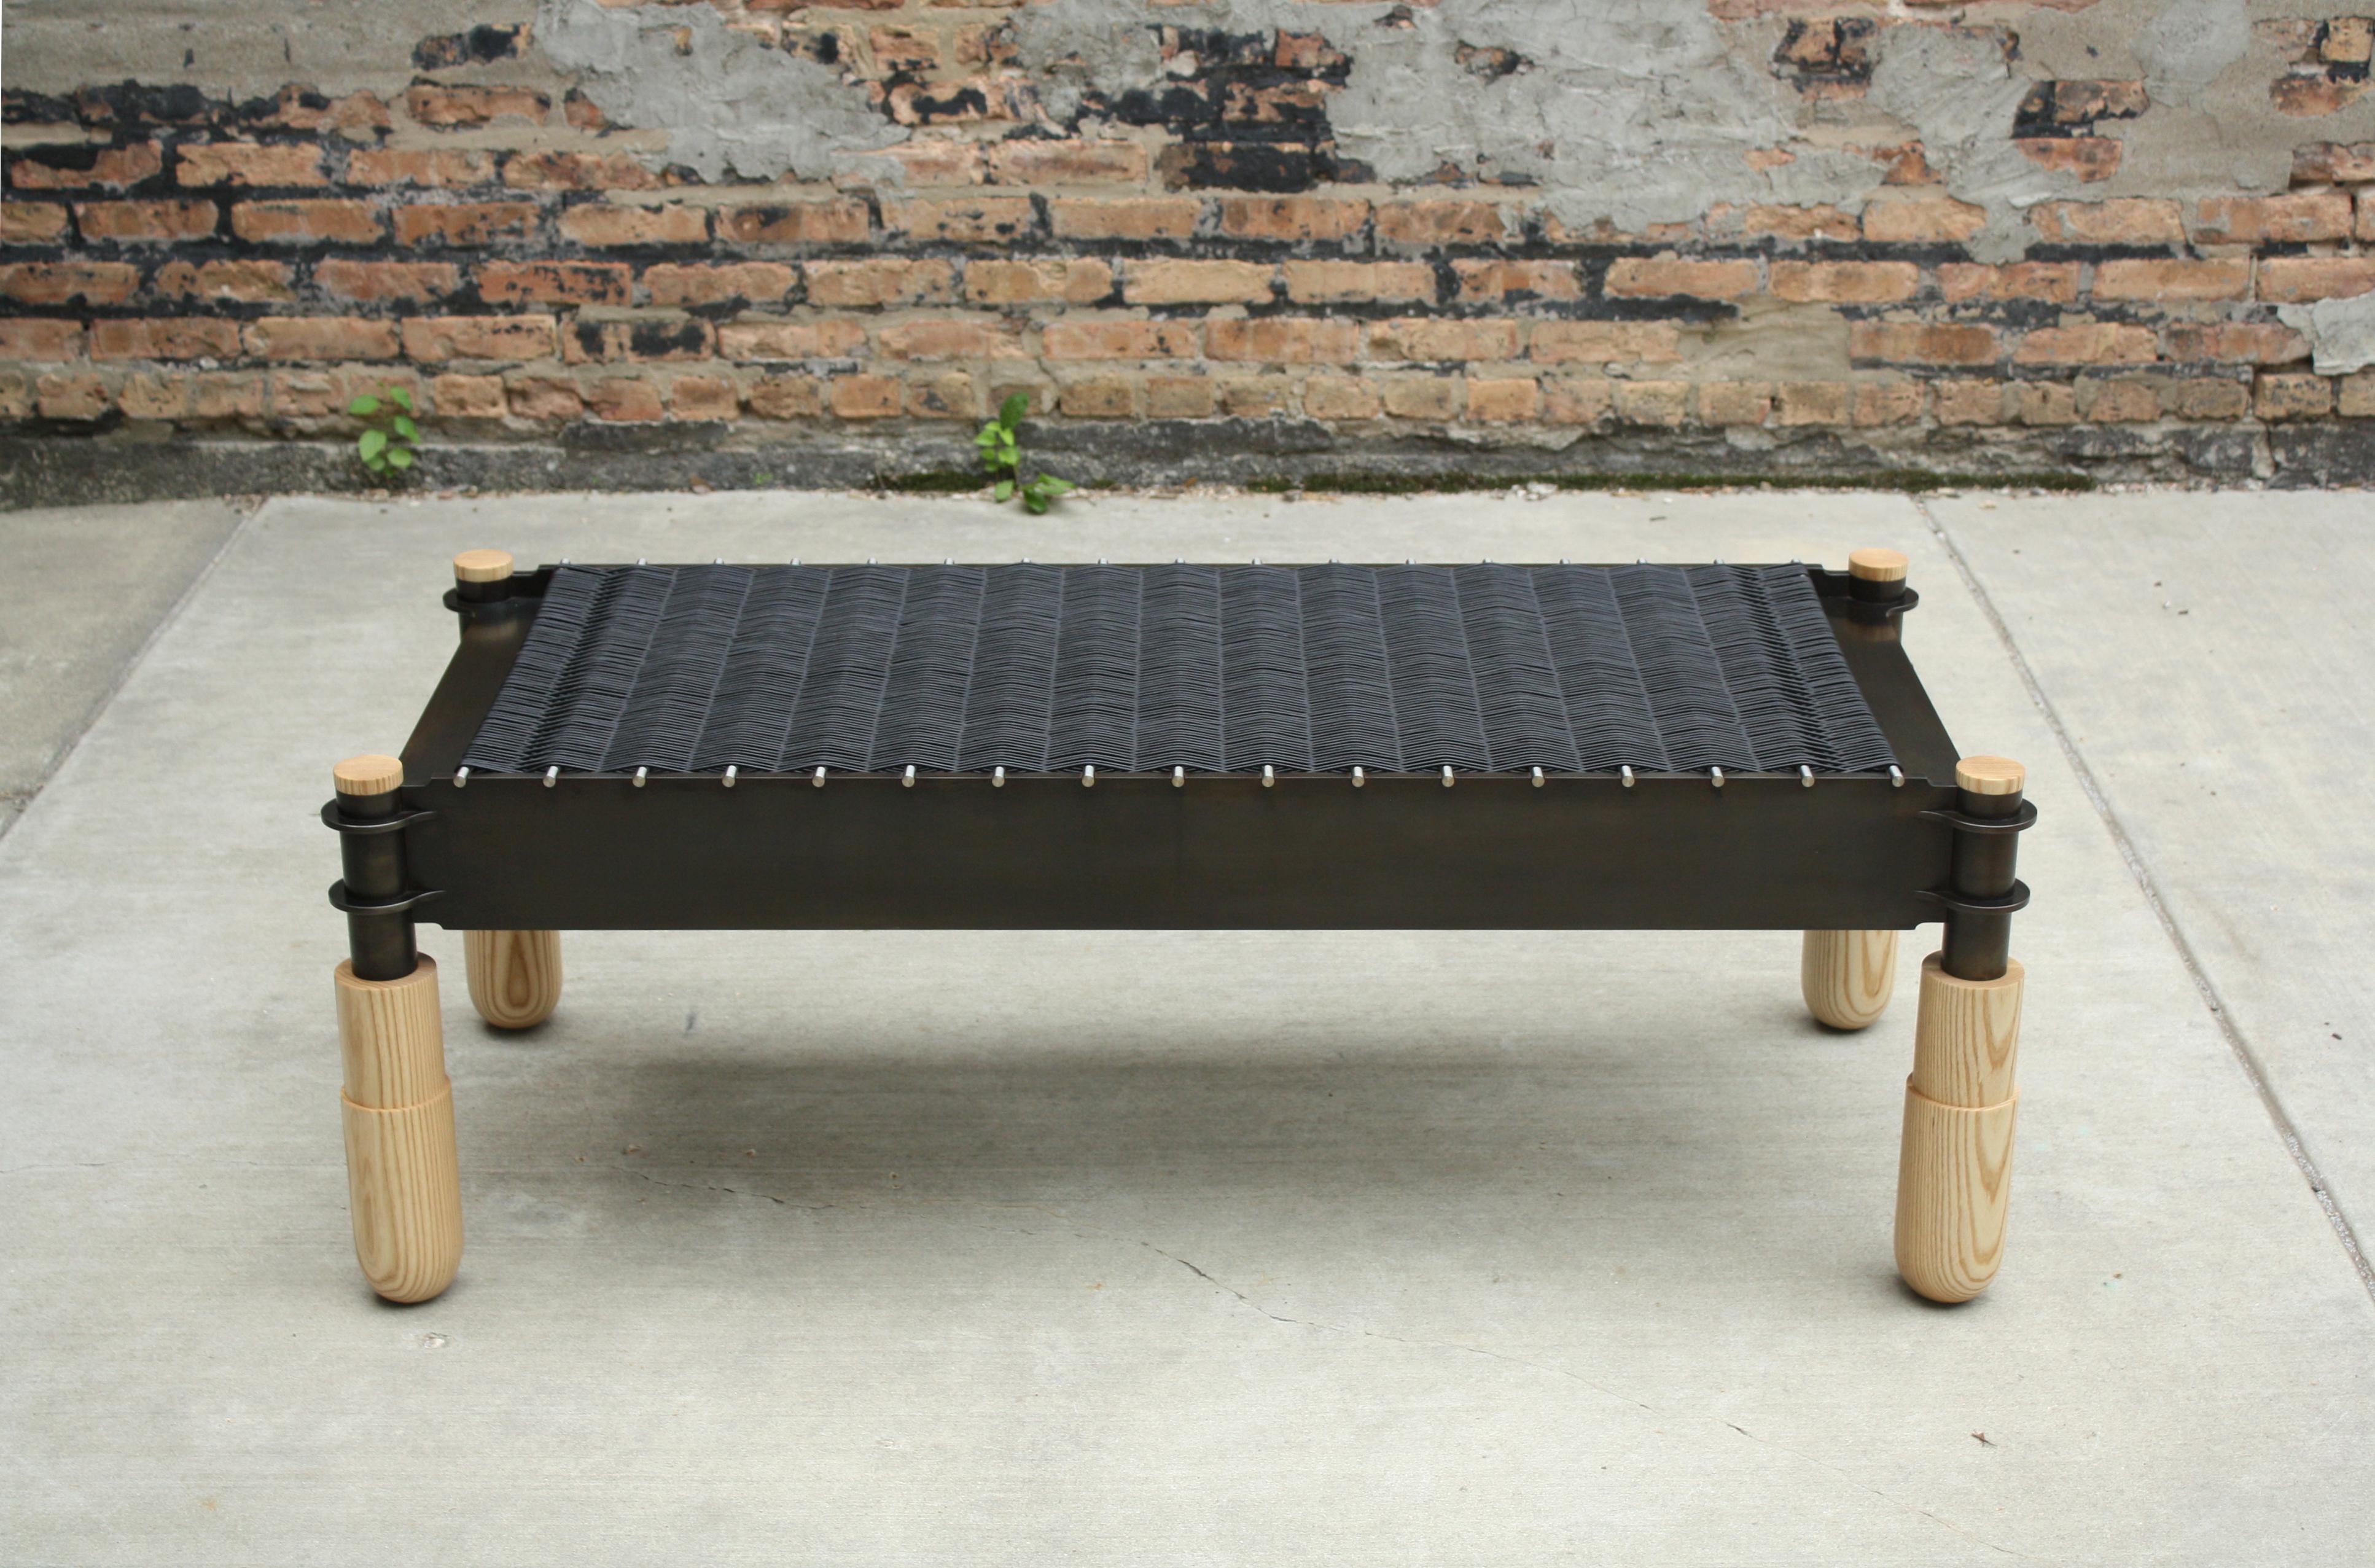 shown at various dimensions and finishes

blackened steel, brushed stainless, and black leather with natural ash and natural walnut legs 

standard (60-52” wide x 24-18” deep x 18” tall)

The BASSO bench by LAYLO is handmade to order in custom